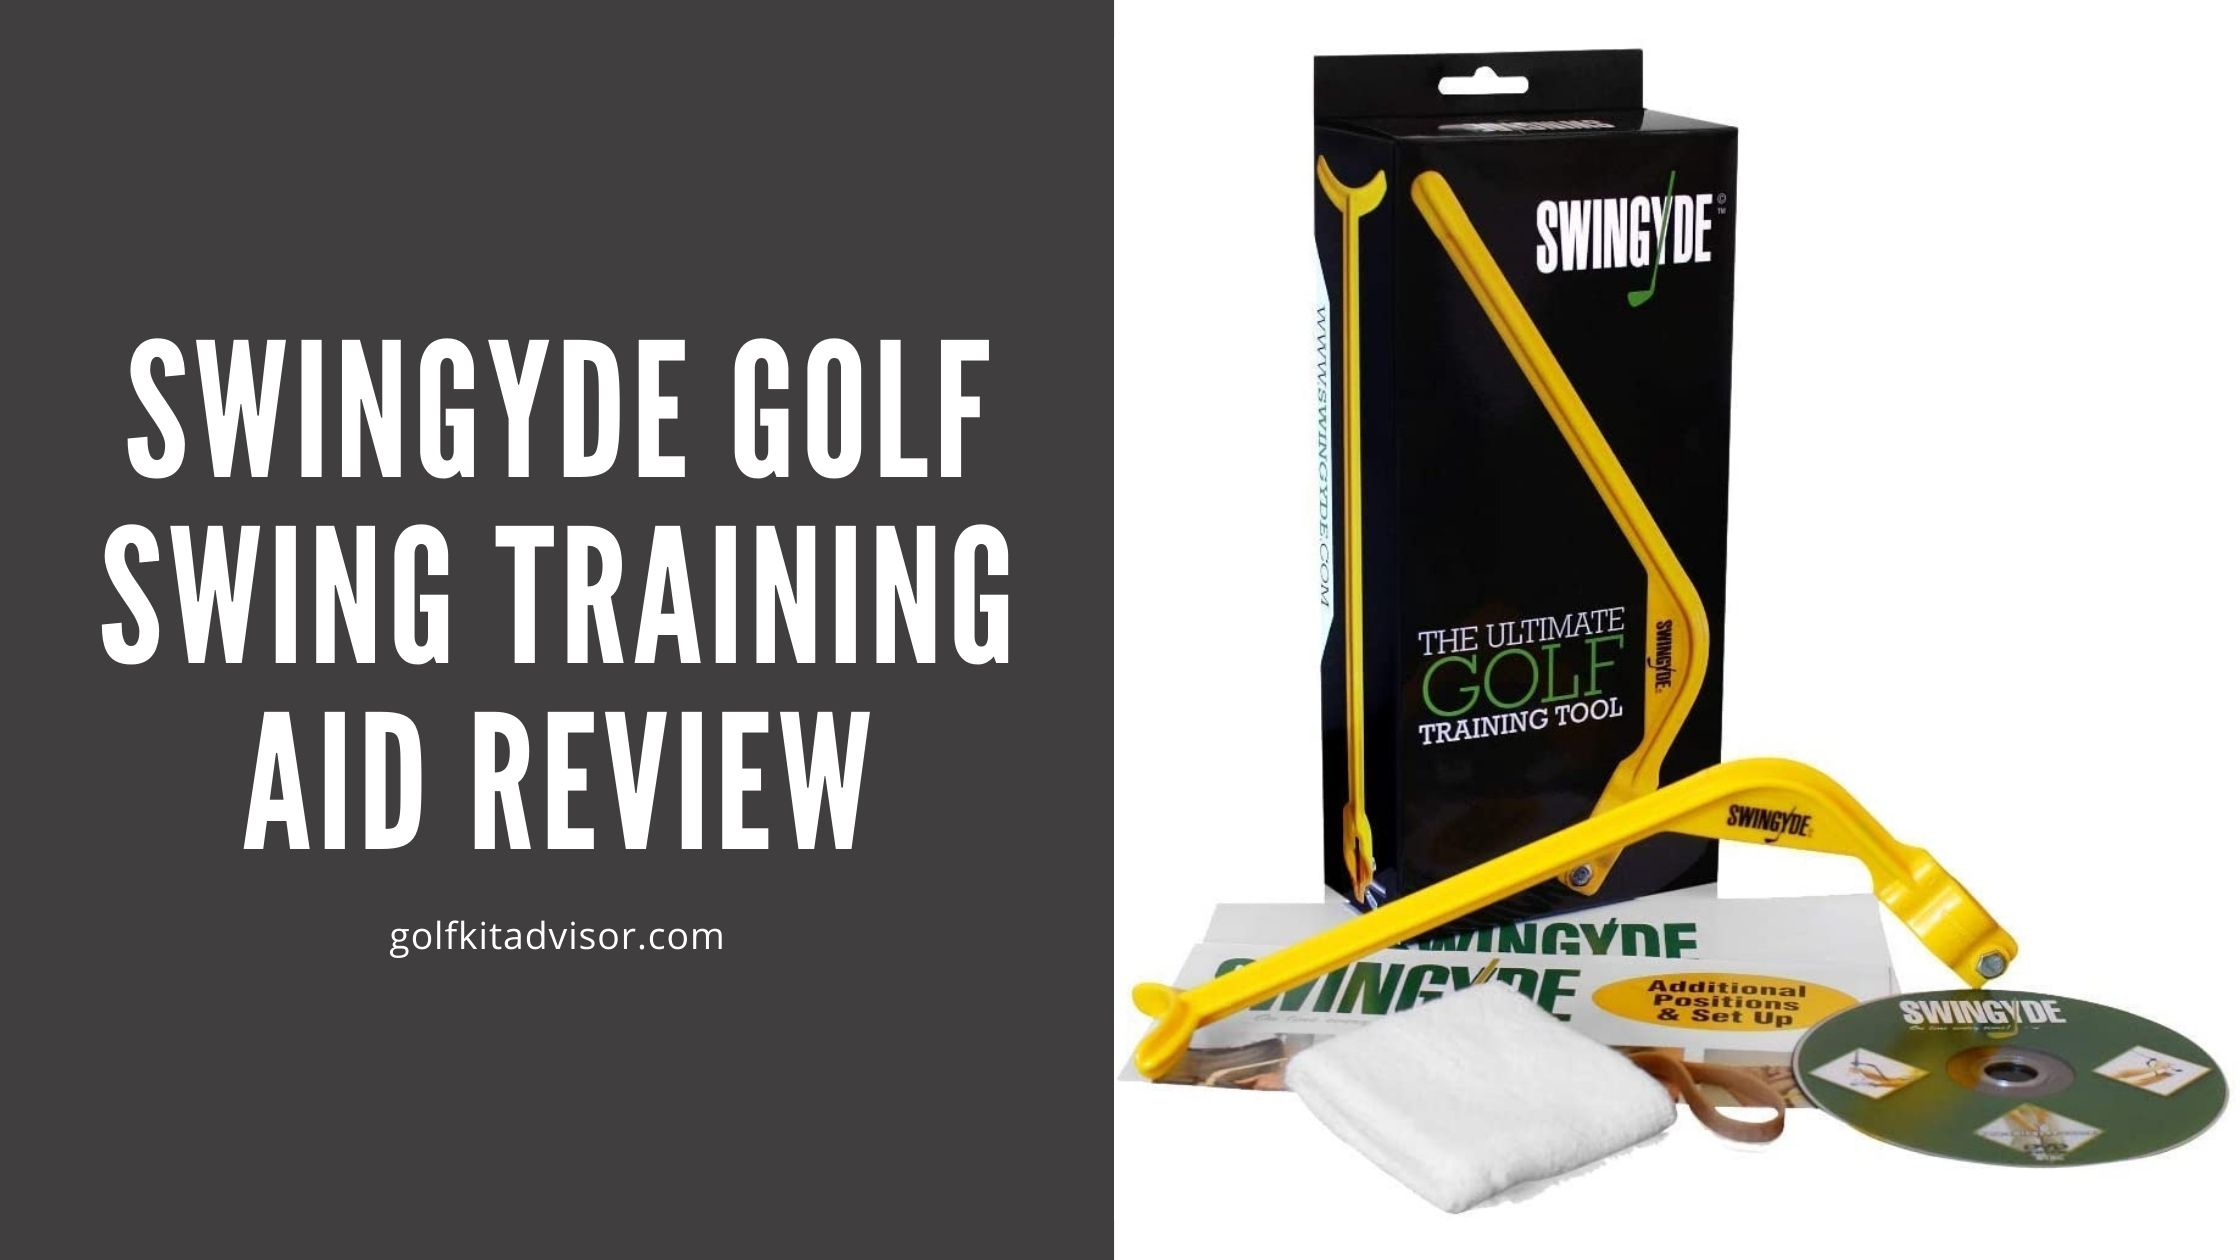 Swingyde Golf Swing Training Aid Review